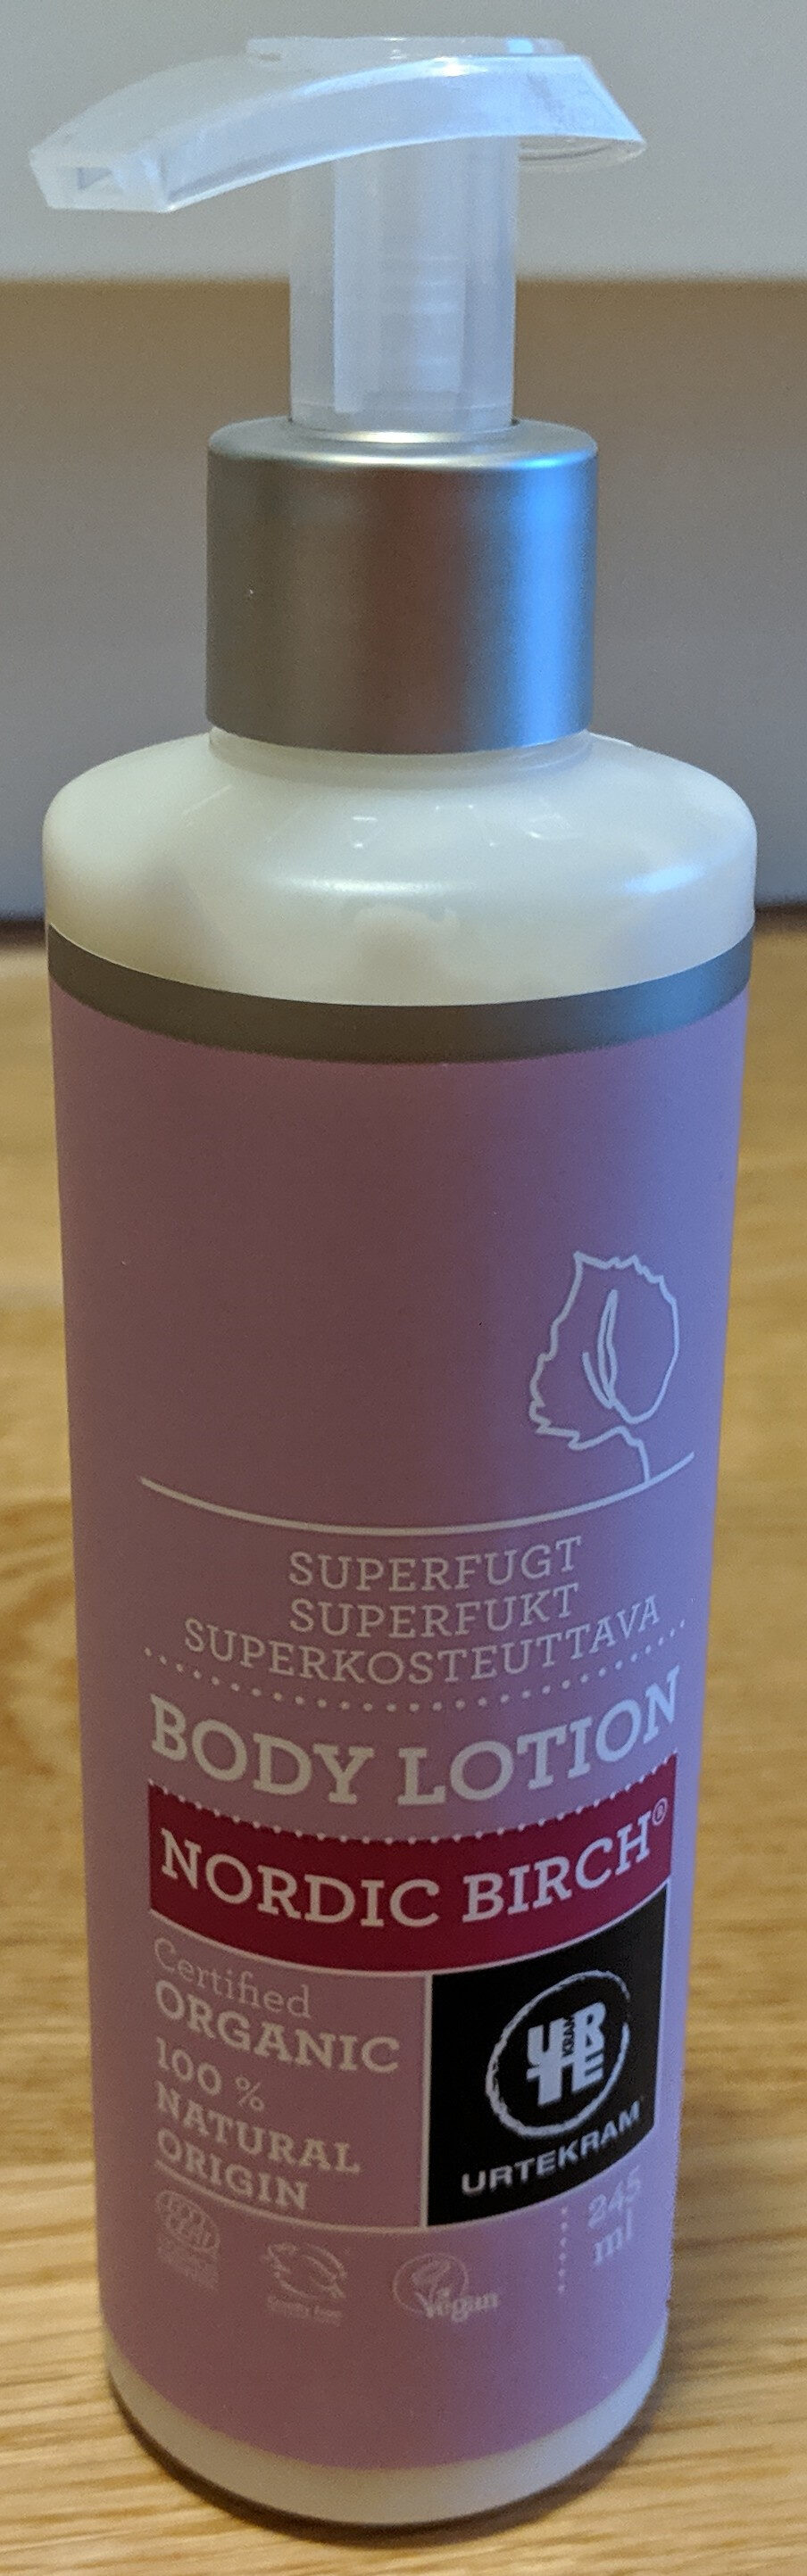 Superfit Body Lotion Nordic Birch - Product - sv